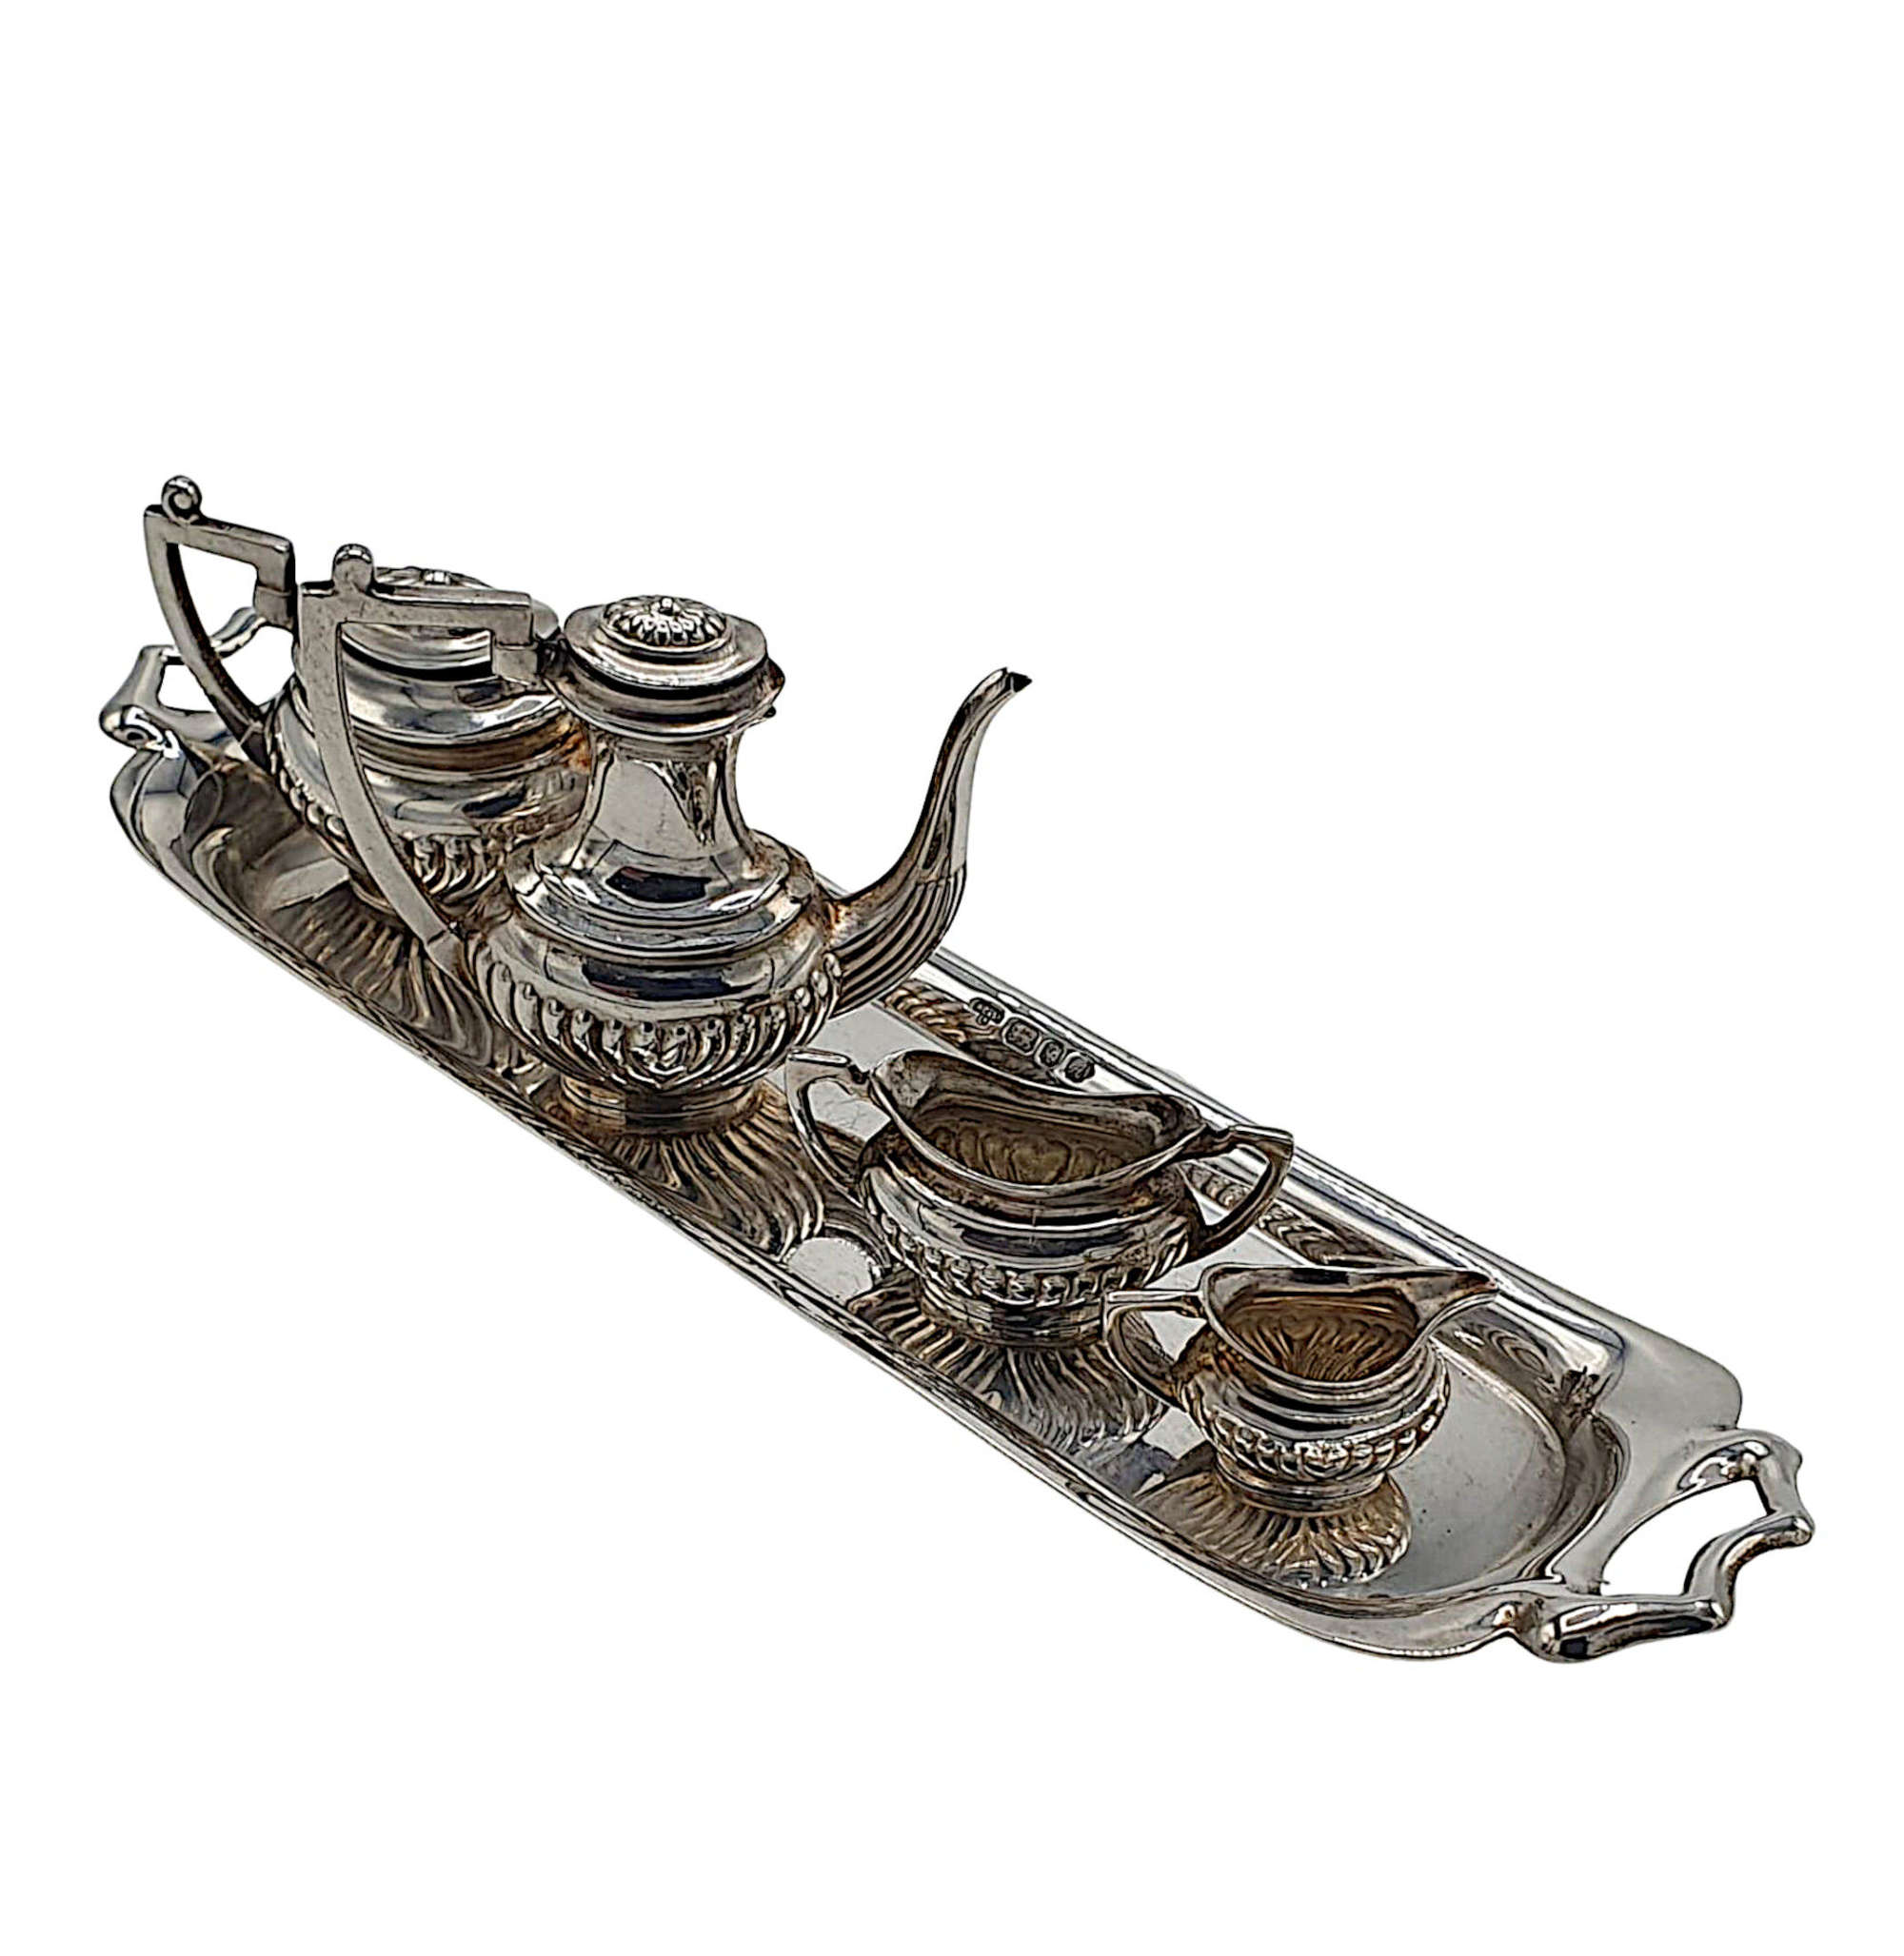 A Lovely 20th Century Sterling Silver Miniature Tea Set And Tray